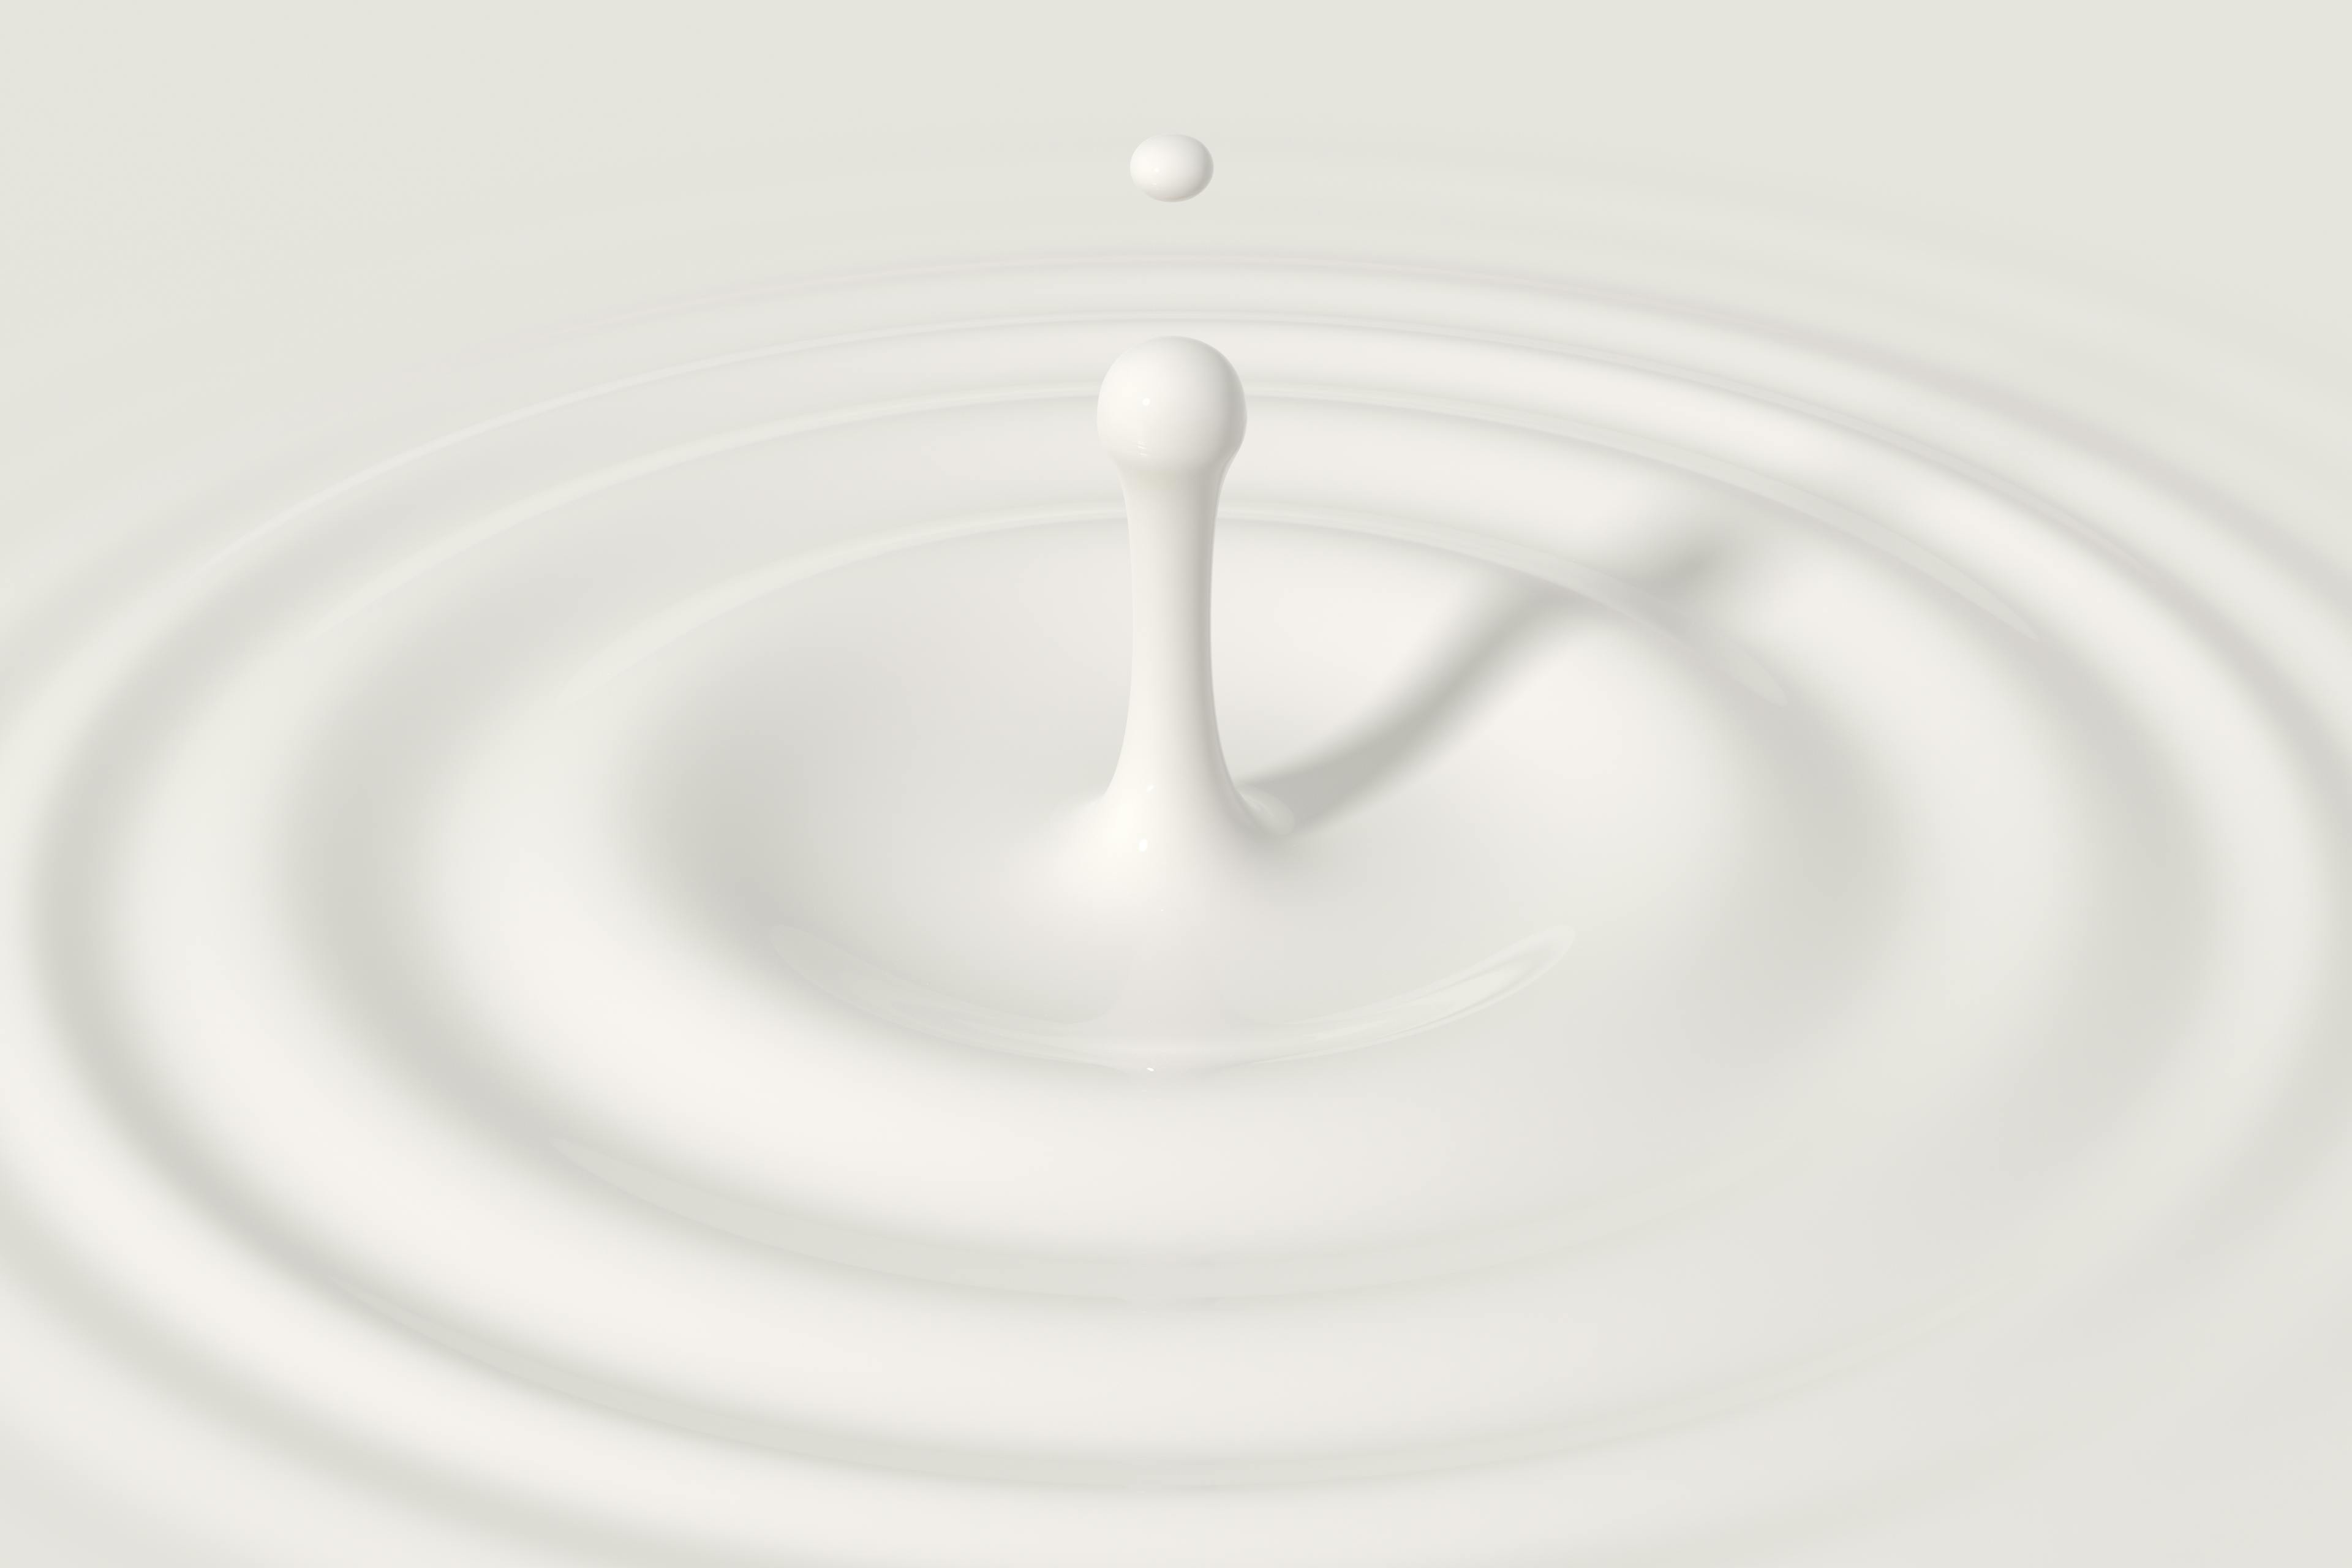 Droplet and ripple in a white liquid